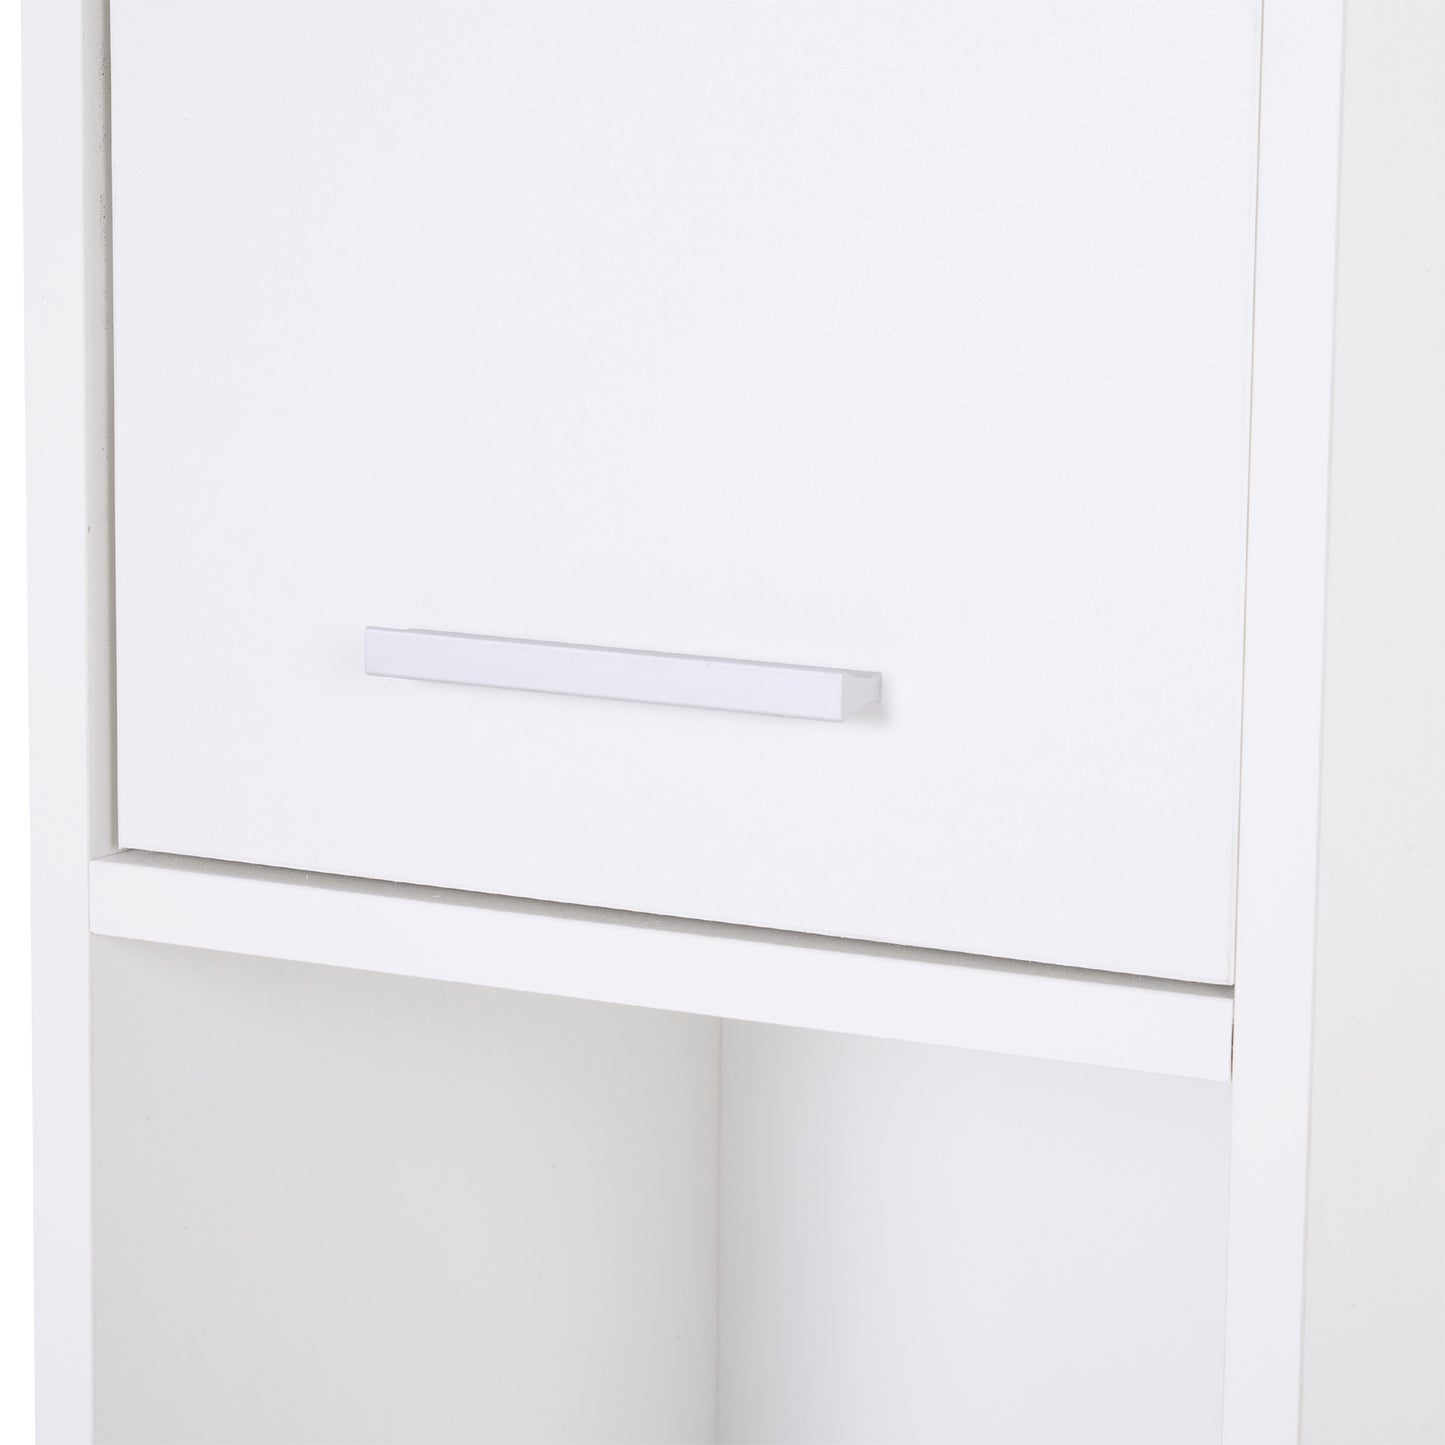 HOMCOM Particle Board Tall Freestanding Bathroom Storage Cabinet White